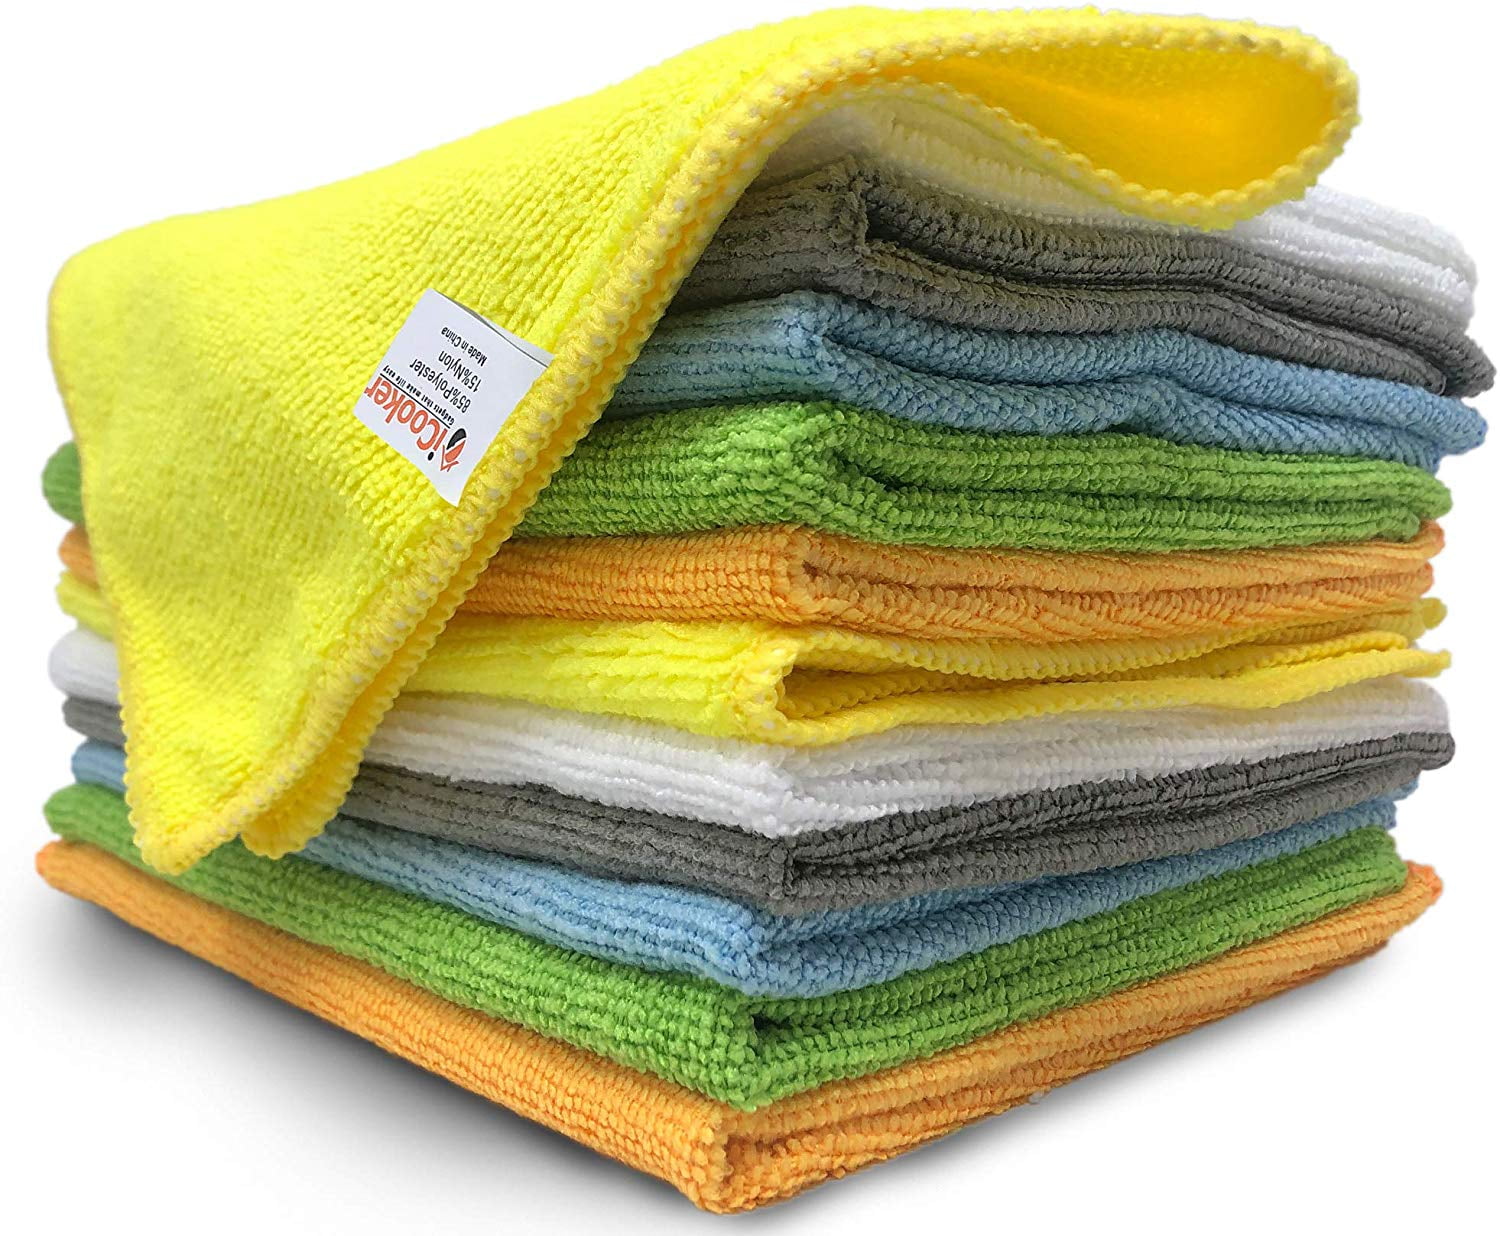 12 Pack Super Soft Microfiber Cleaning Cloths, Eco-Friendly Kitchen Towels  Wash Cloths - Car Cleaning Cloths Machine Washable, Super Absorbent